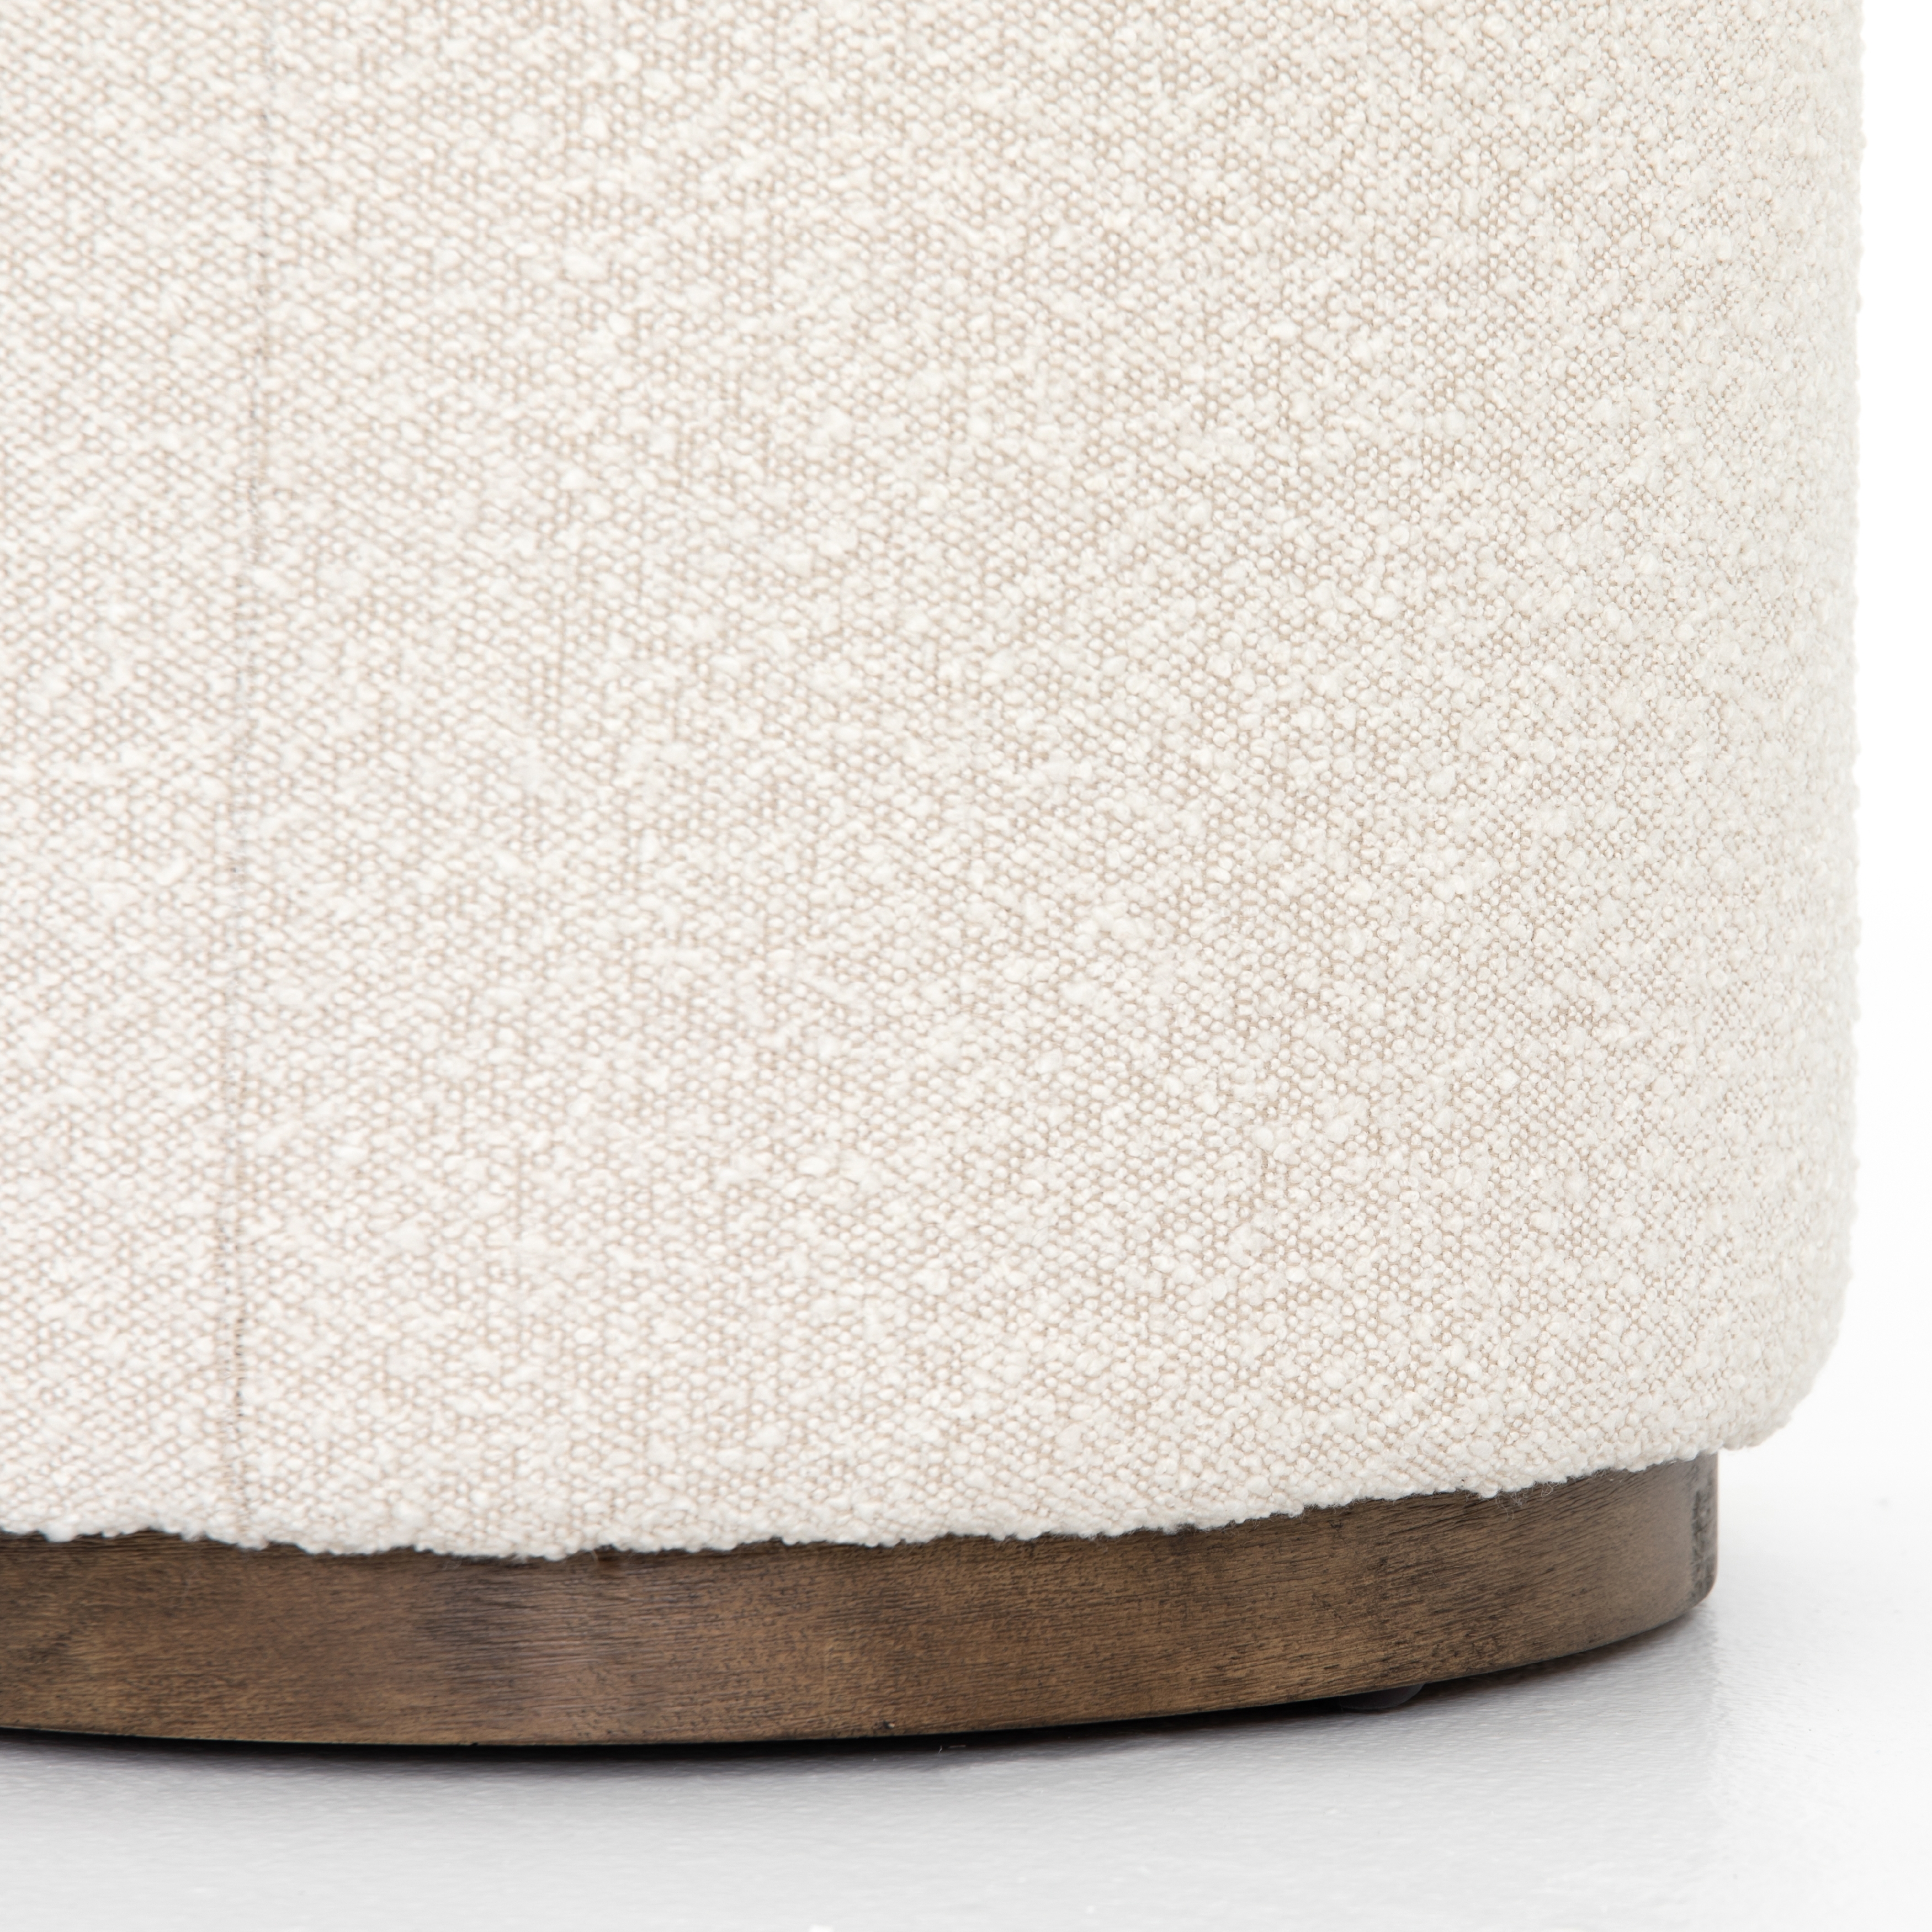 Sinclair Round Ottoman-Knoll Natural - Image 8